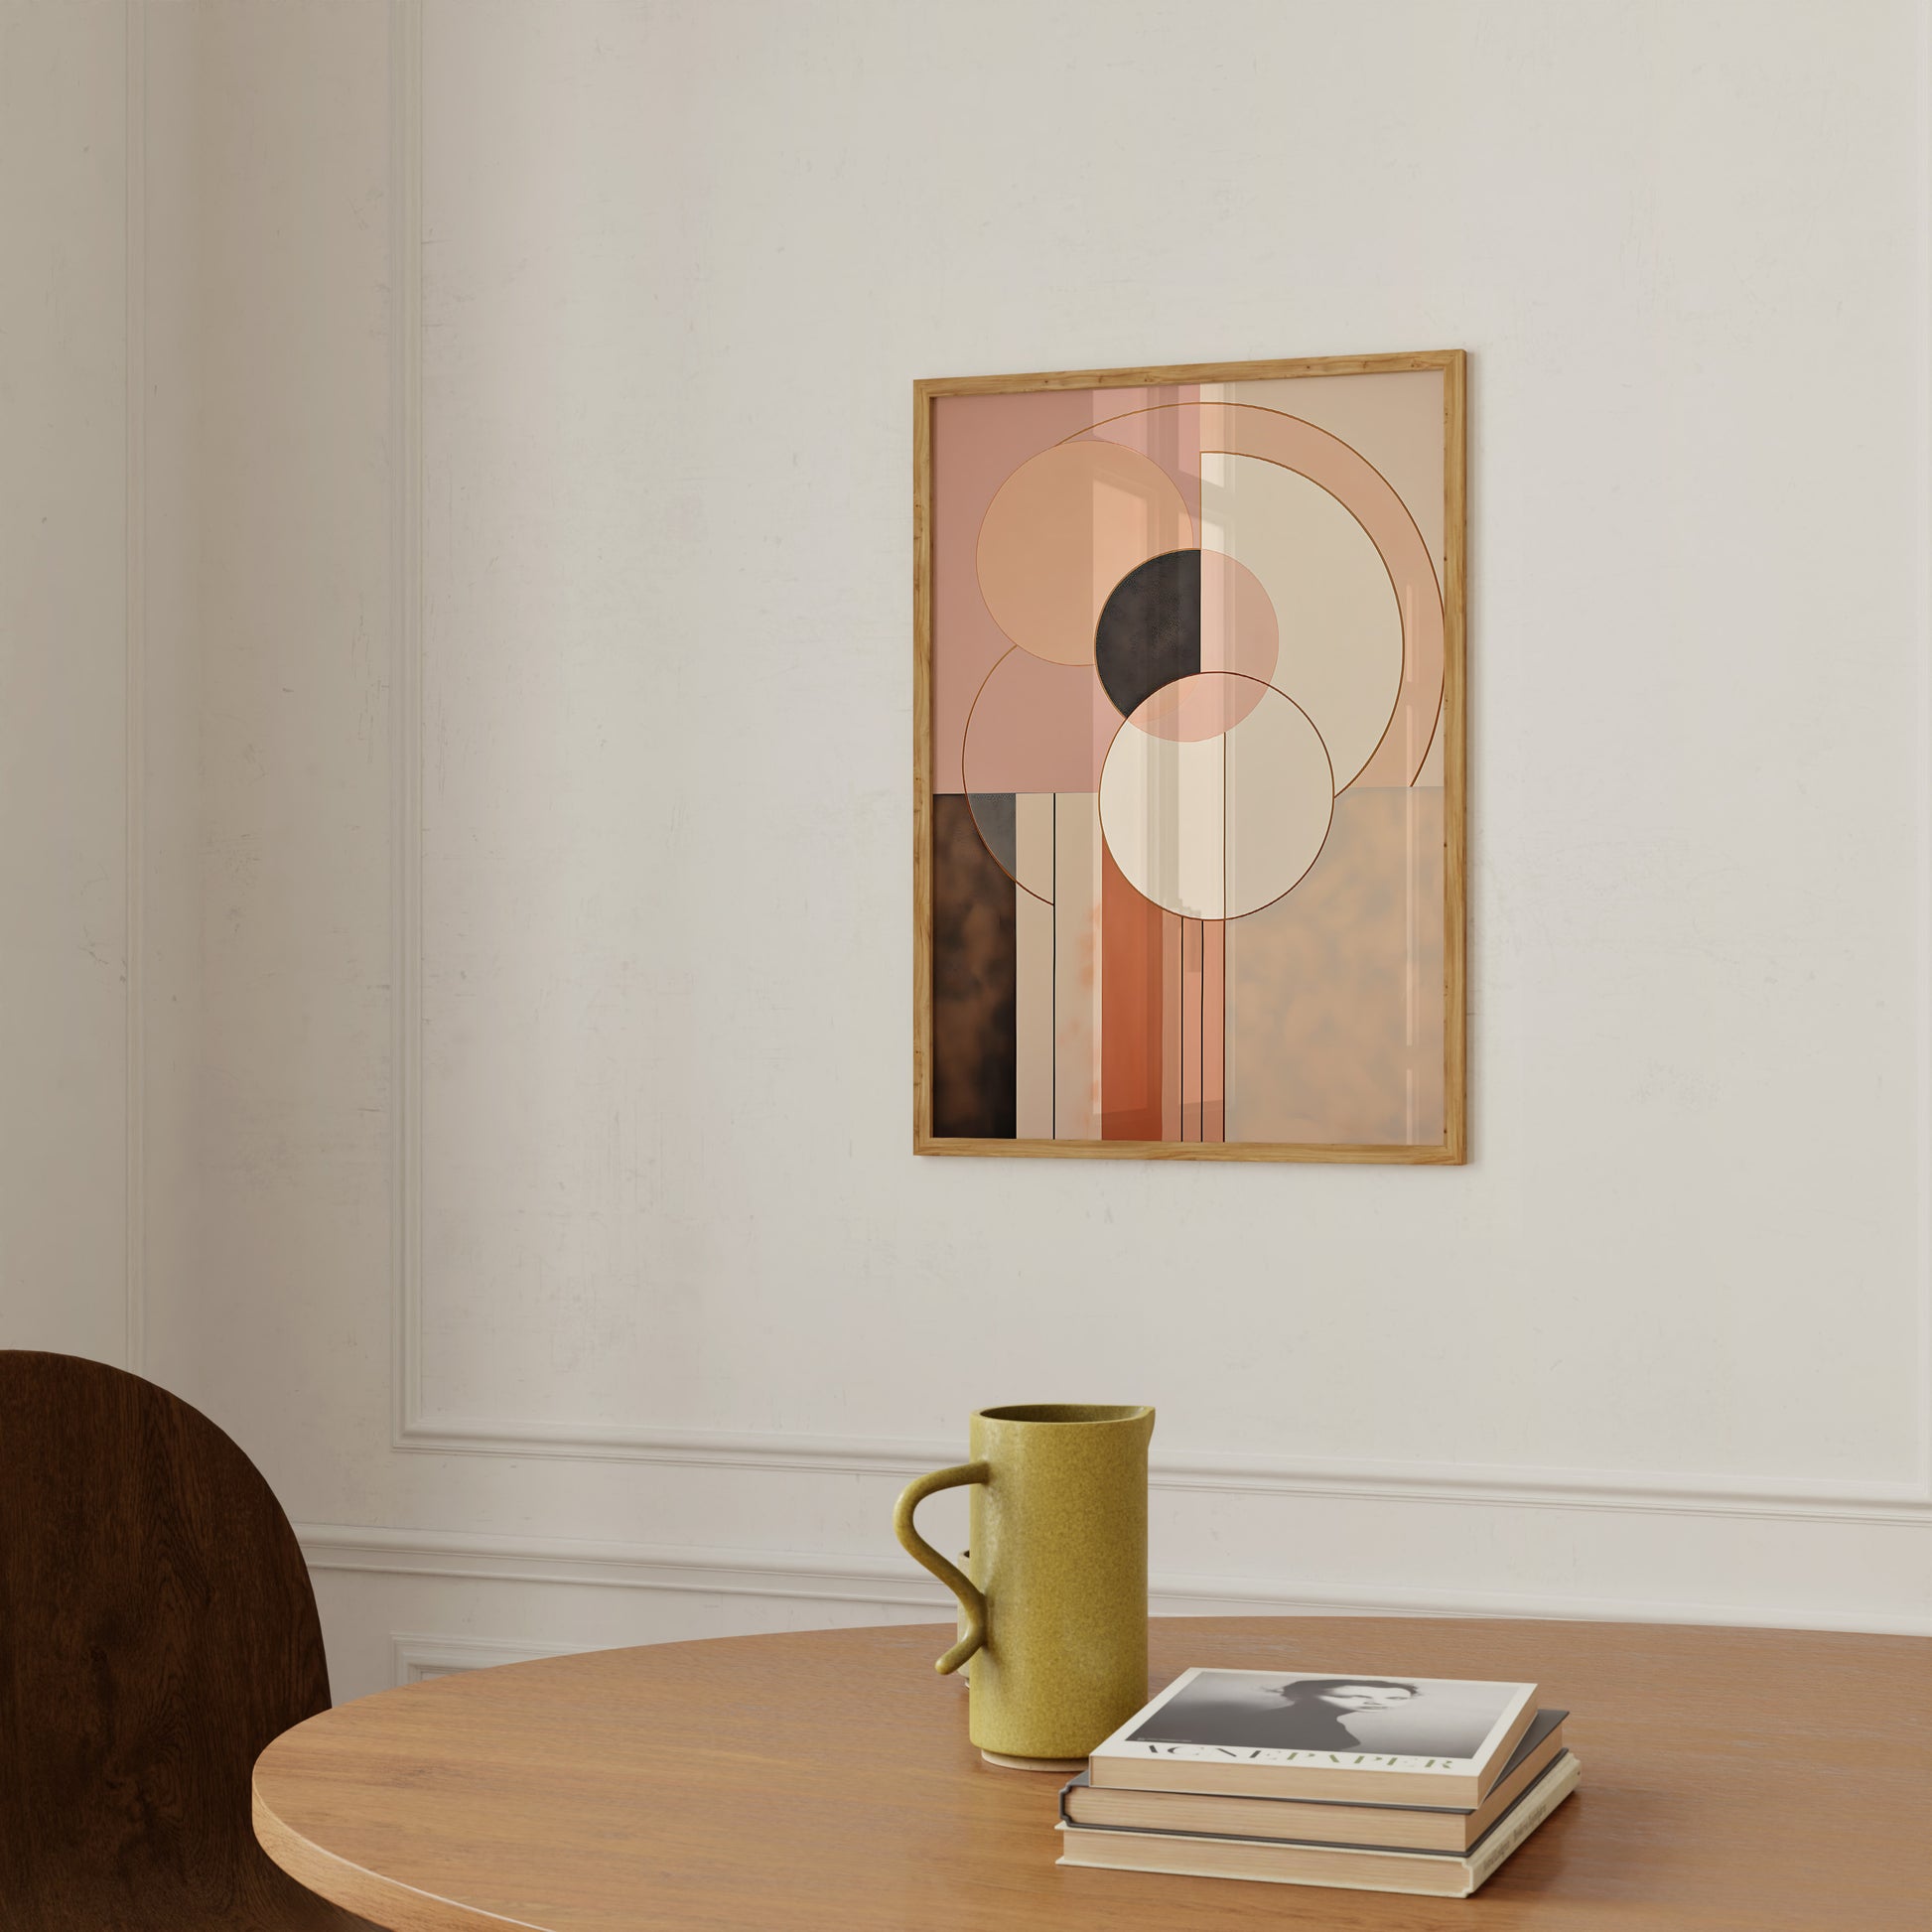 Abstract wall art with geometric shapes above a table with a mug and books.